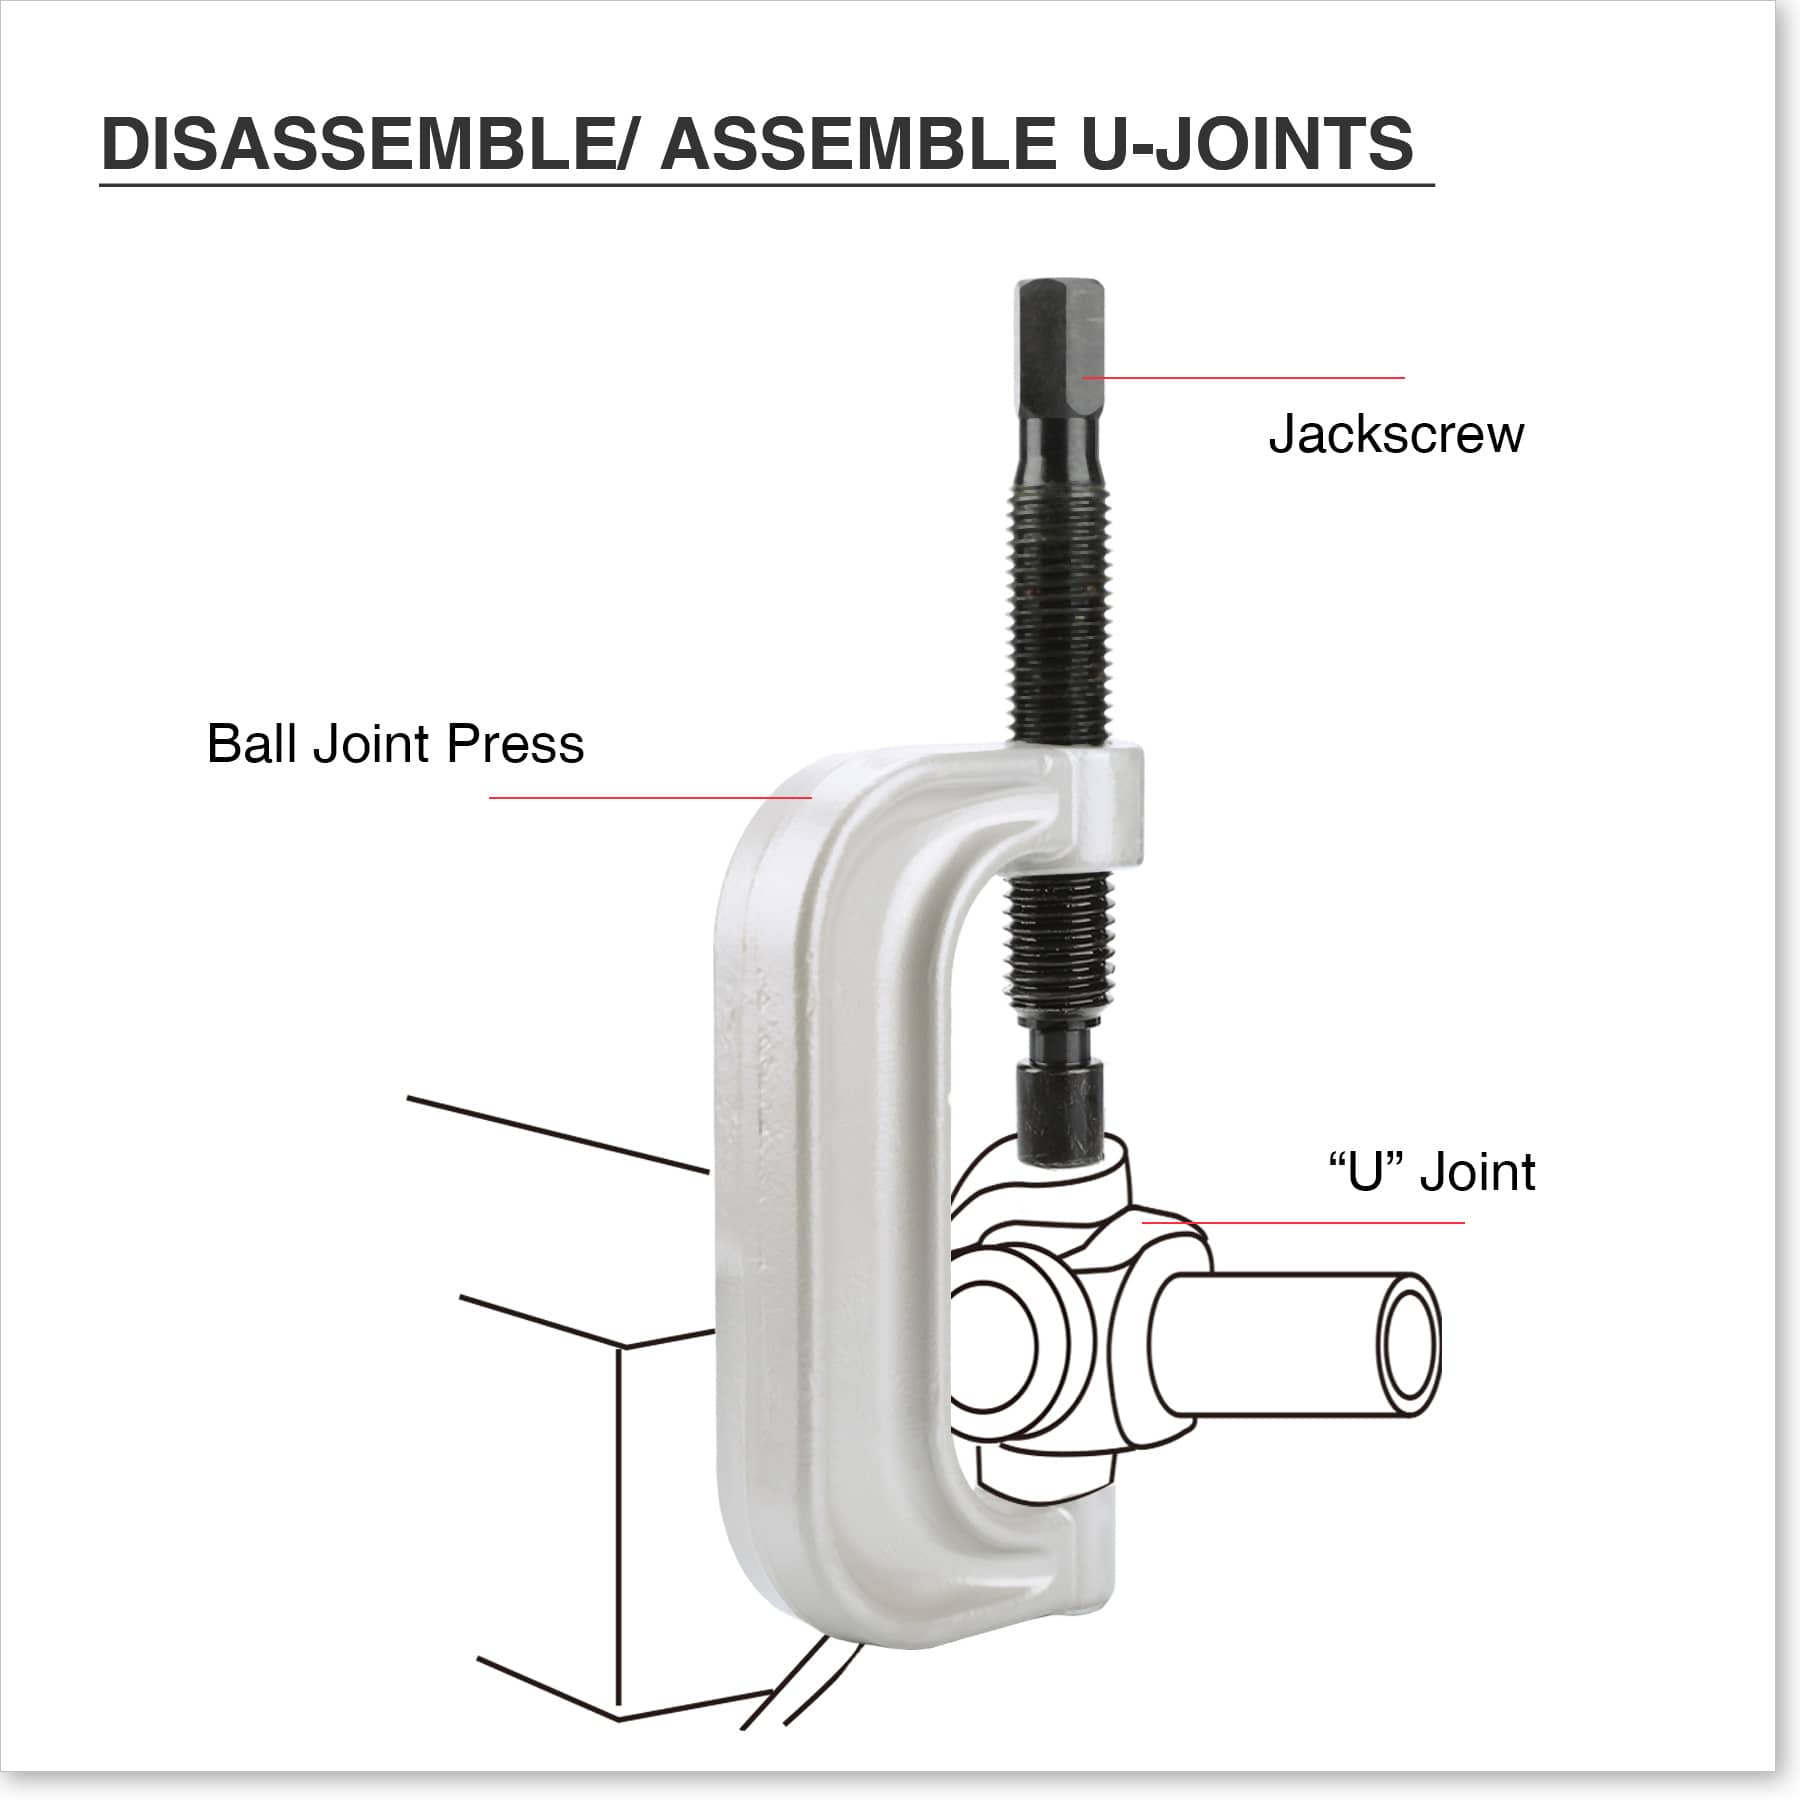 how to disassemble and assemble u-joints